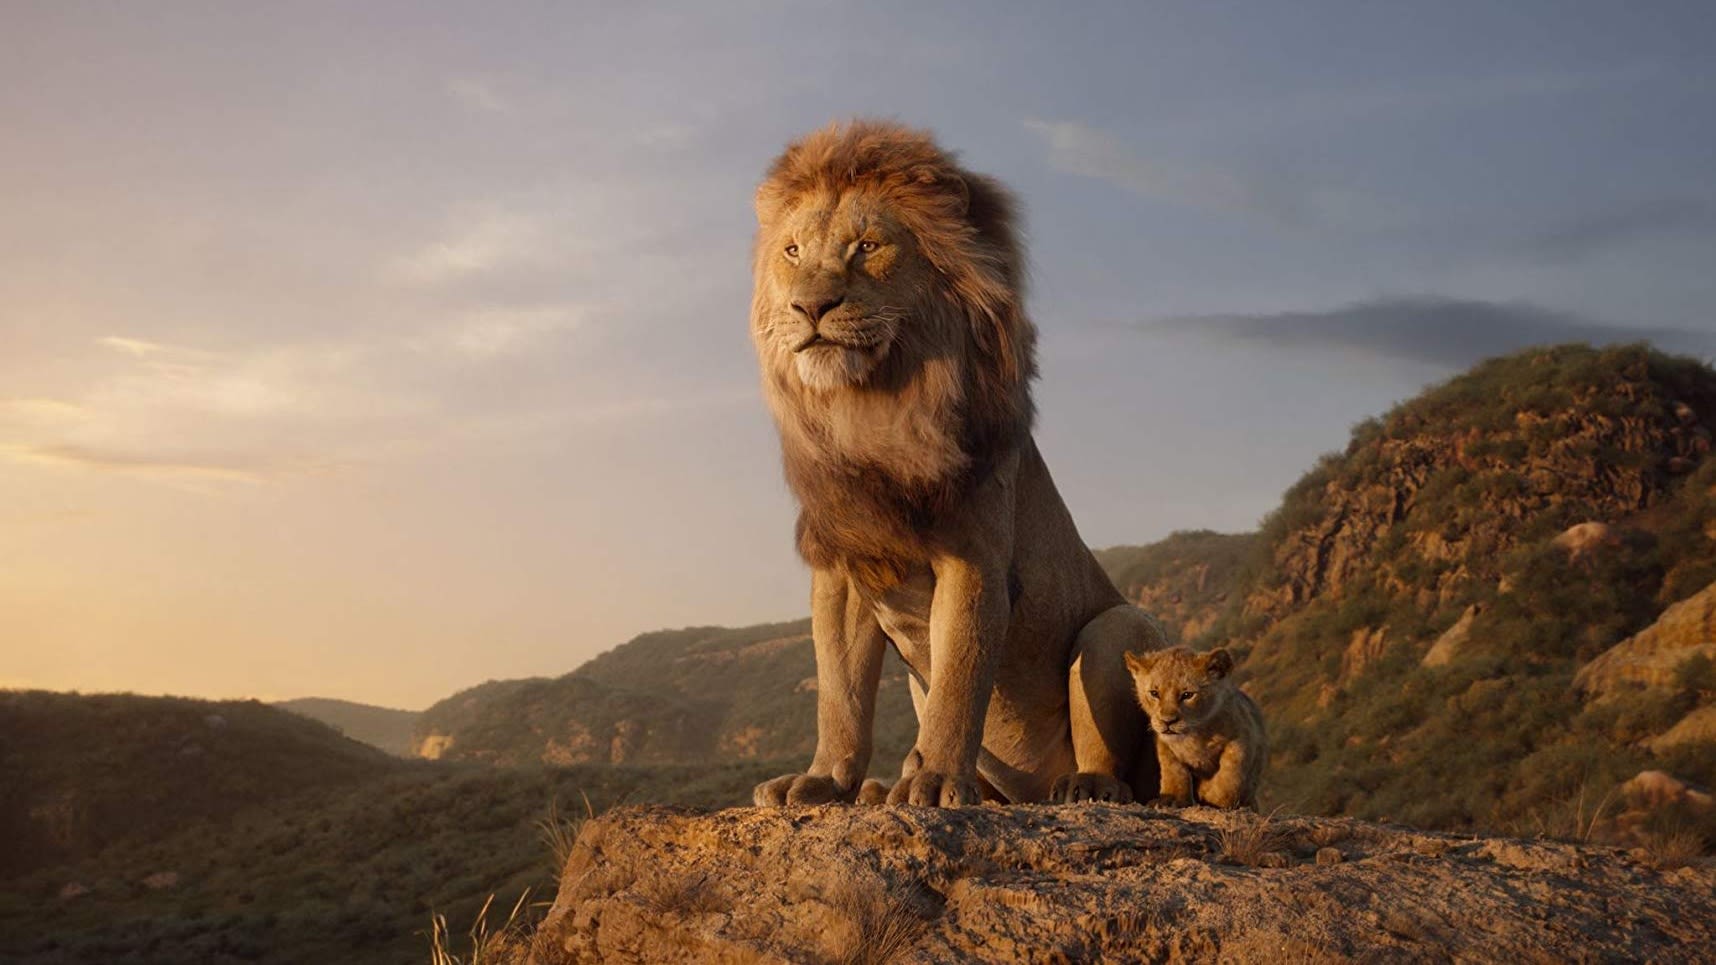 Disney's 'The Lion King' tops $1 billion at the box office